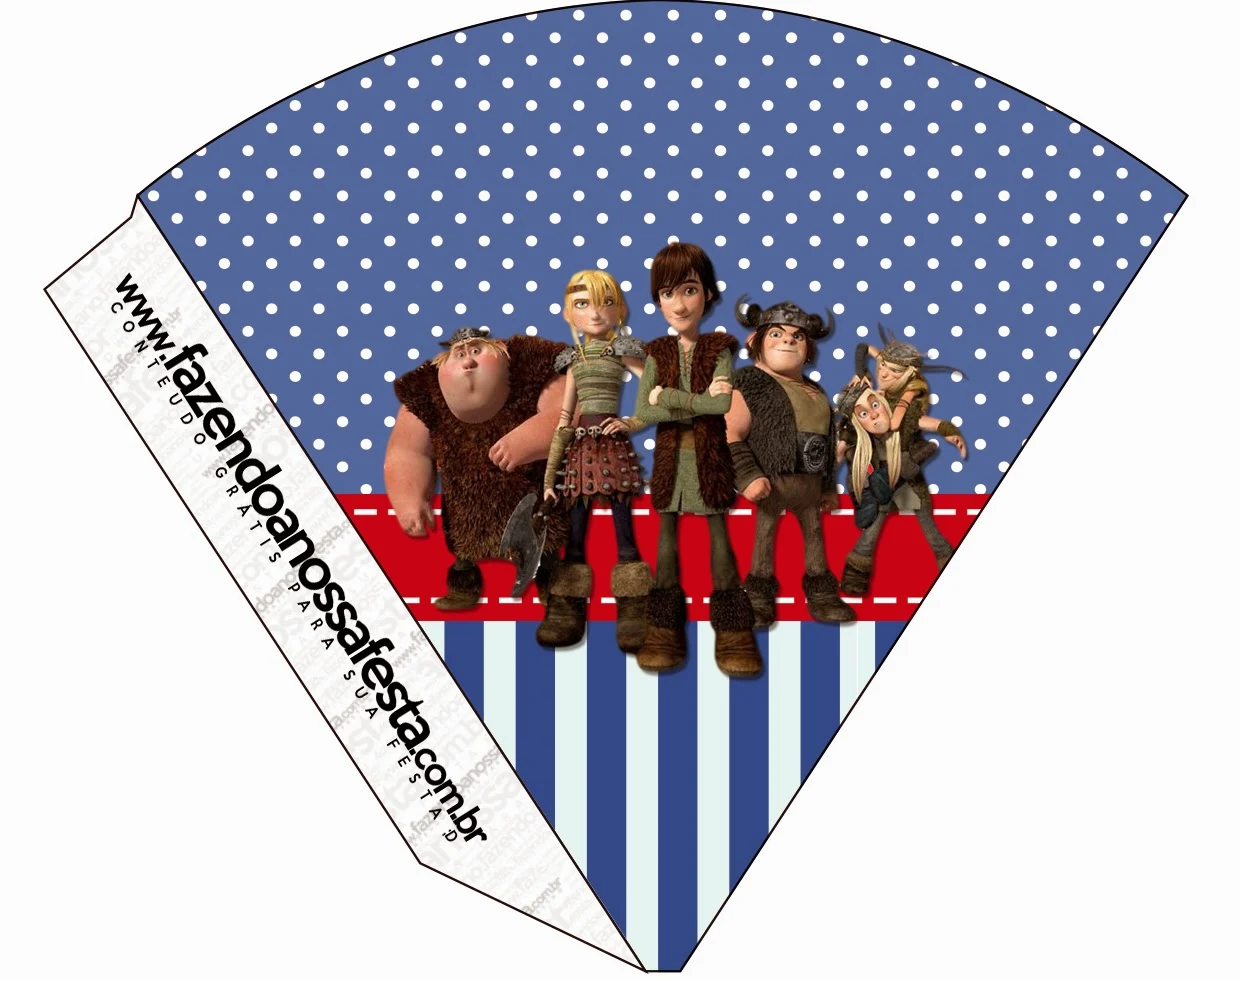 How to Train your Dragon Free Printable Cones.